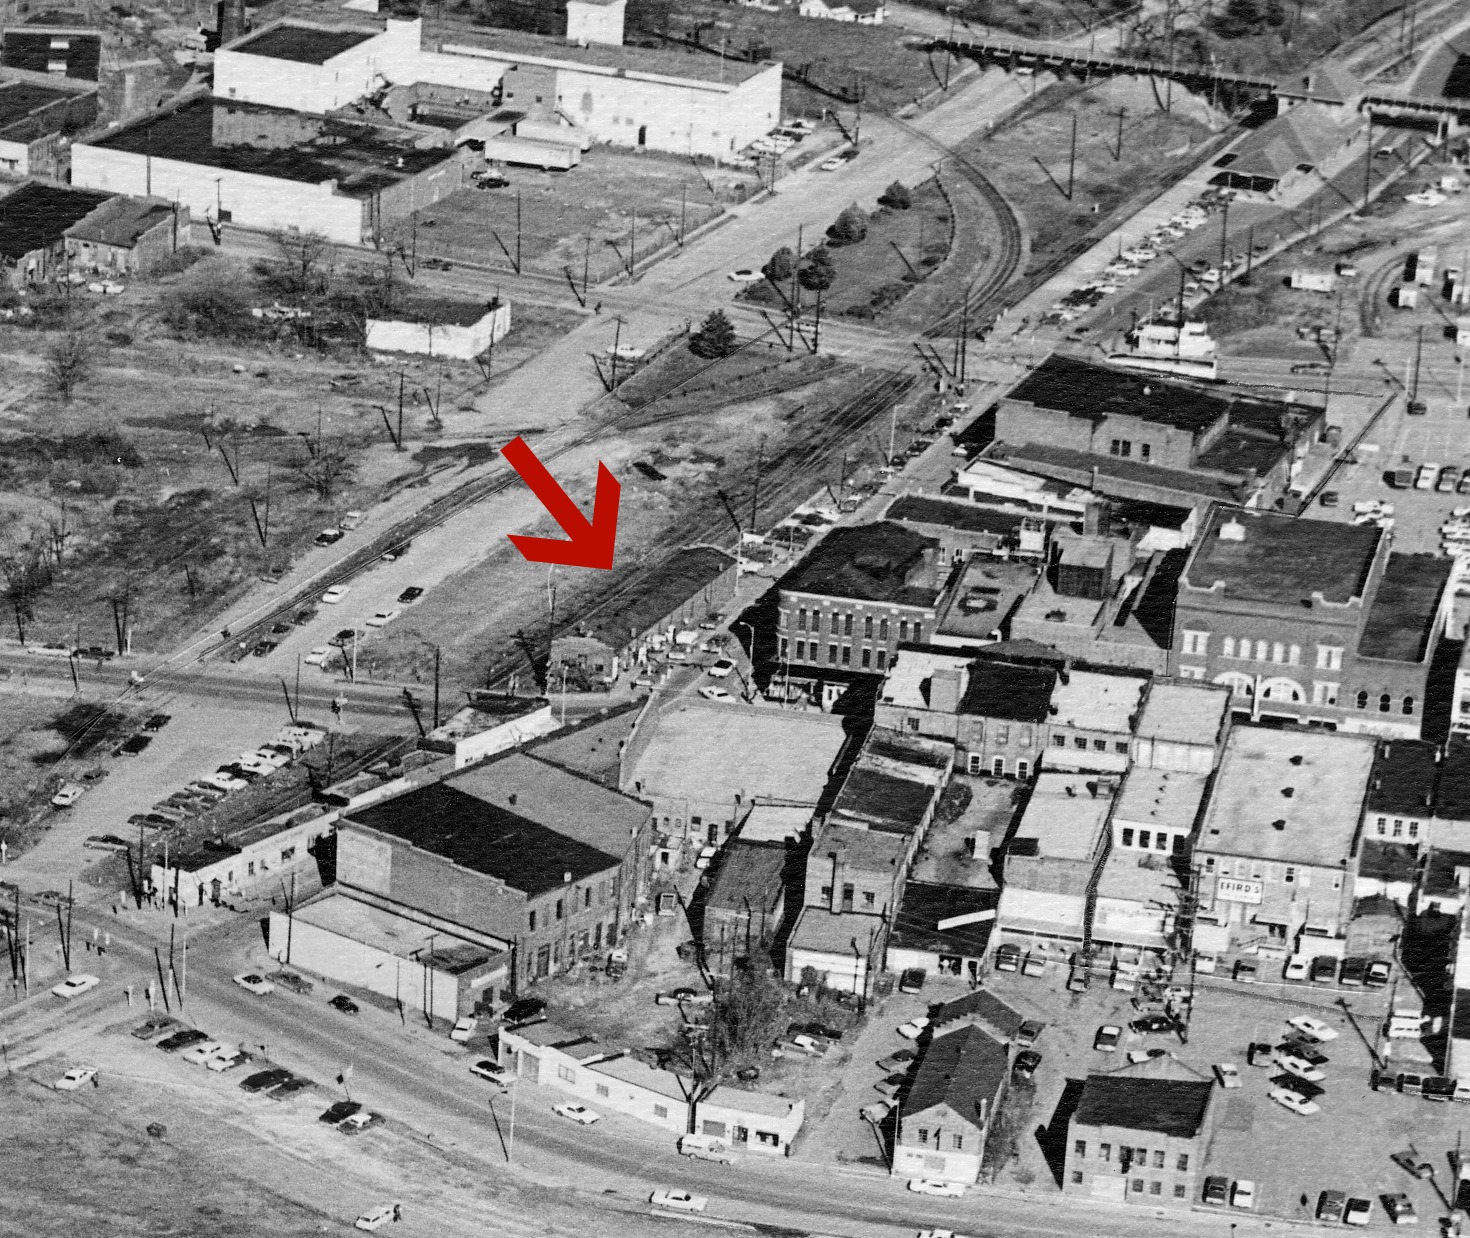 AERIAL IMAGE OF THE DOWNTOWN AREA - ARROW TO THE CRAIG WHOLESALE BUSINESS